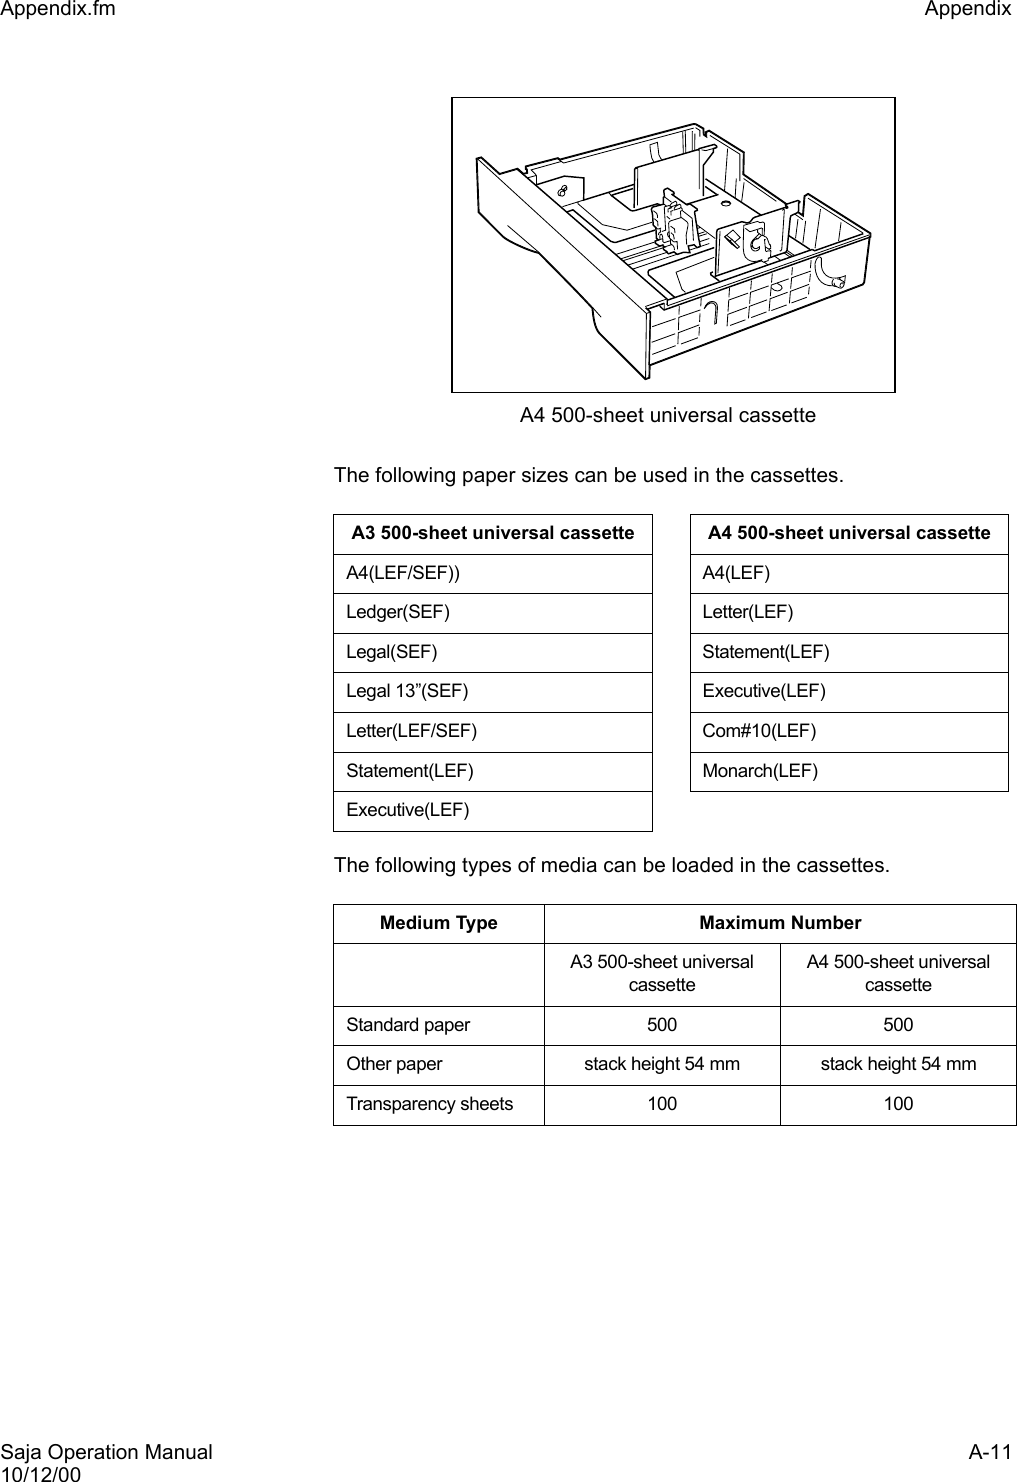 Saja Operation Manual A-1110/12/00Appendix.fm Appendix The following paper sizes can be used in the cassettes.The following types of media can be loaded in the cassettes.A3 500-sheet universal cassette A4 500-sheet universal cassetteA4(LEF/SEF)) A4(LEF)Ledger(SEF) Letter(LEF)Legal(SEF) Statement(LEF)Legal 13”(SEF) Executive(LEF)Letter(LEF/SEF) Com#10(LEF)Statement(LEF) Monarch(LEF)Executive(LEF)Medium Type Maximum NumberA3 500-sheet universal cassetteA4 500-sheet universal cassetteStandard paper 500 500Other paper stack height 54 mm stack height 54 mmTransparency sheets 100 100A4 500-sheet universal cassette